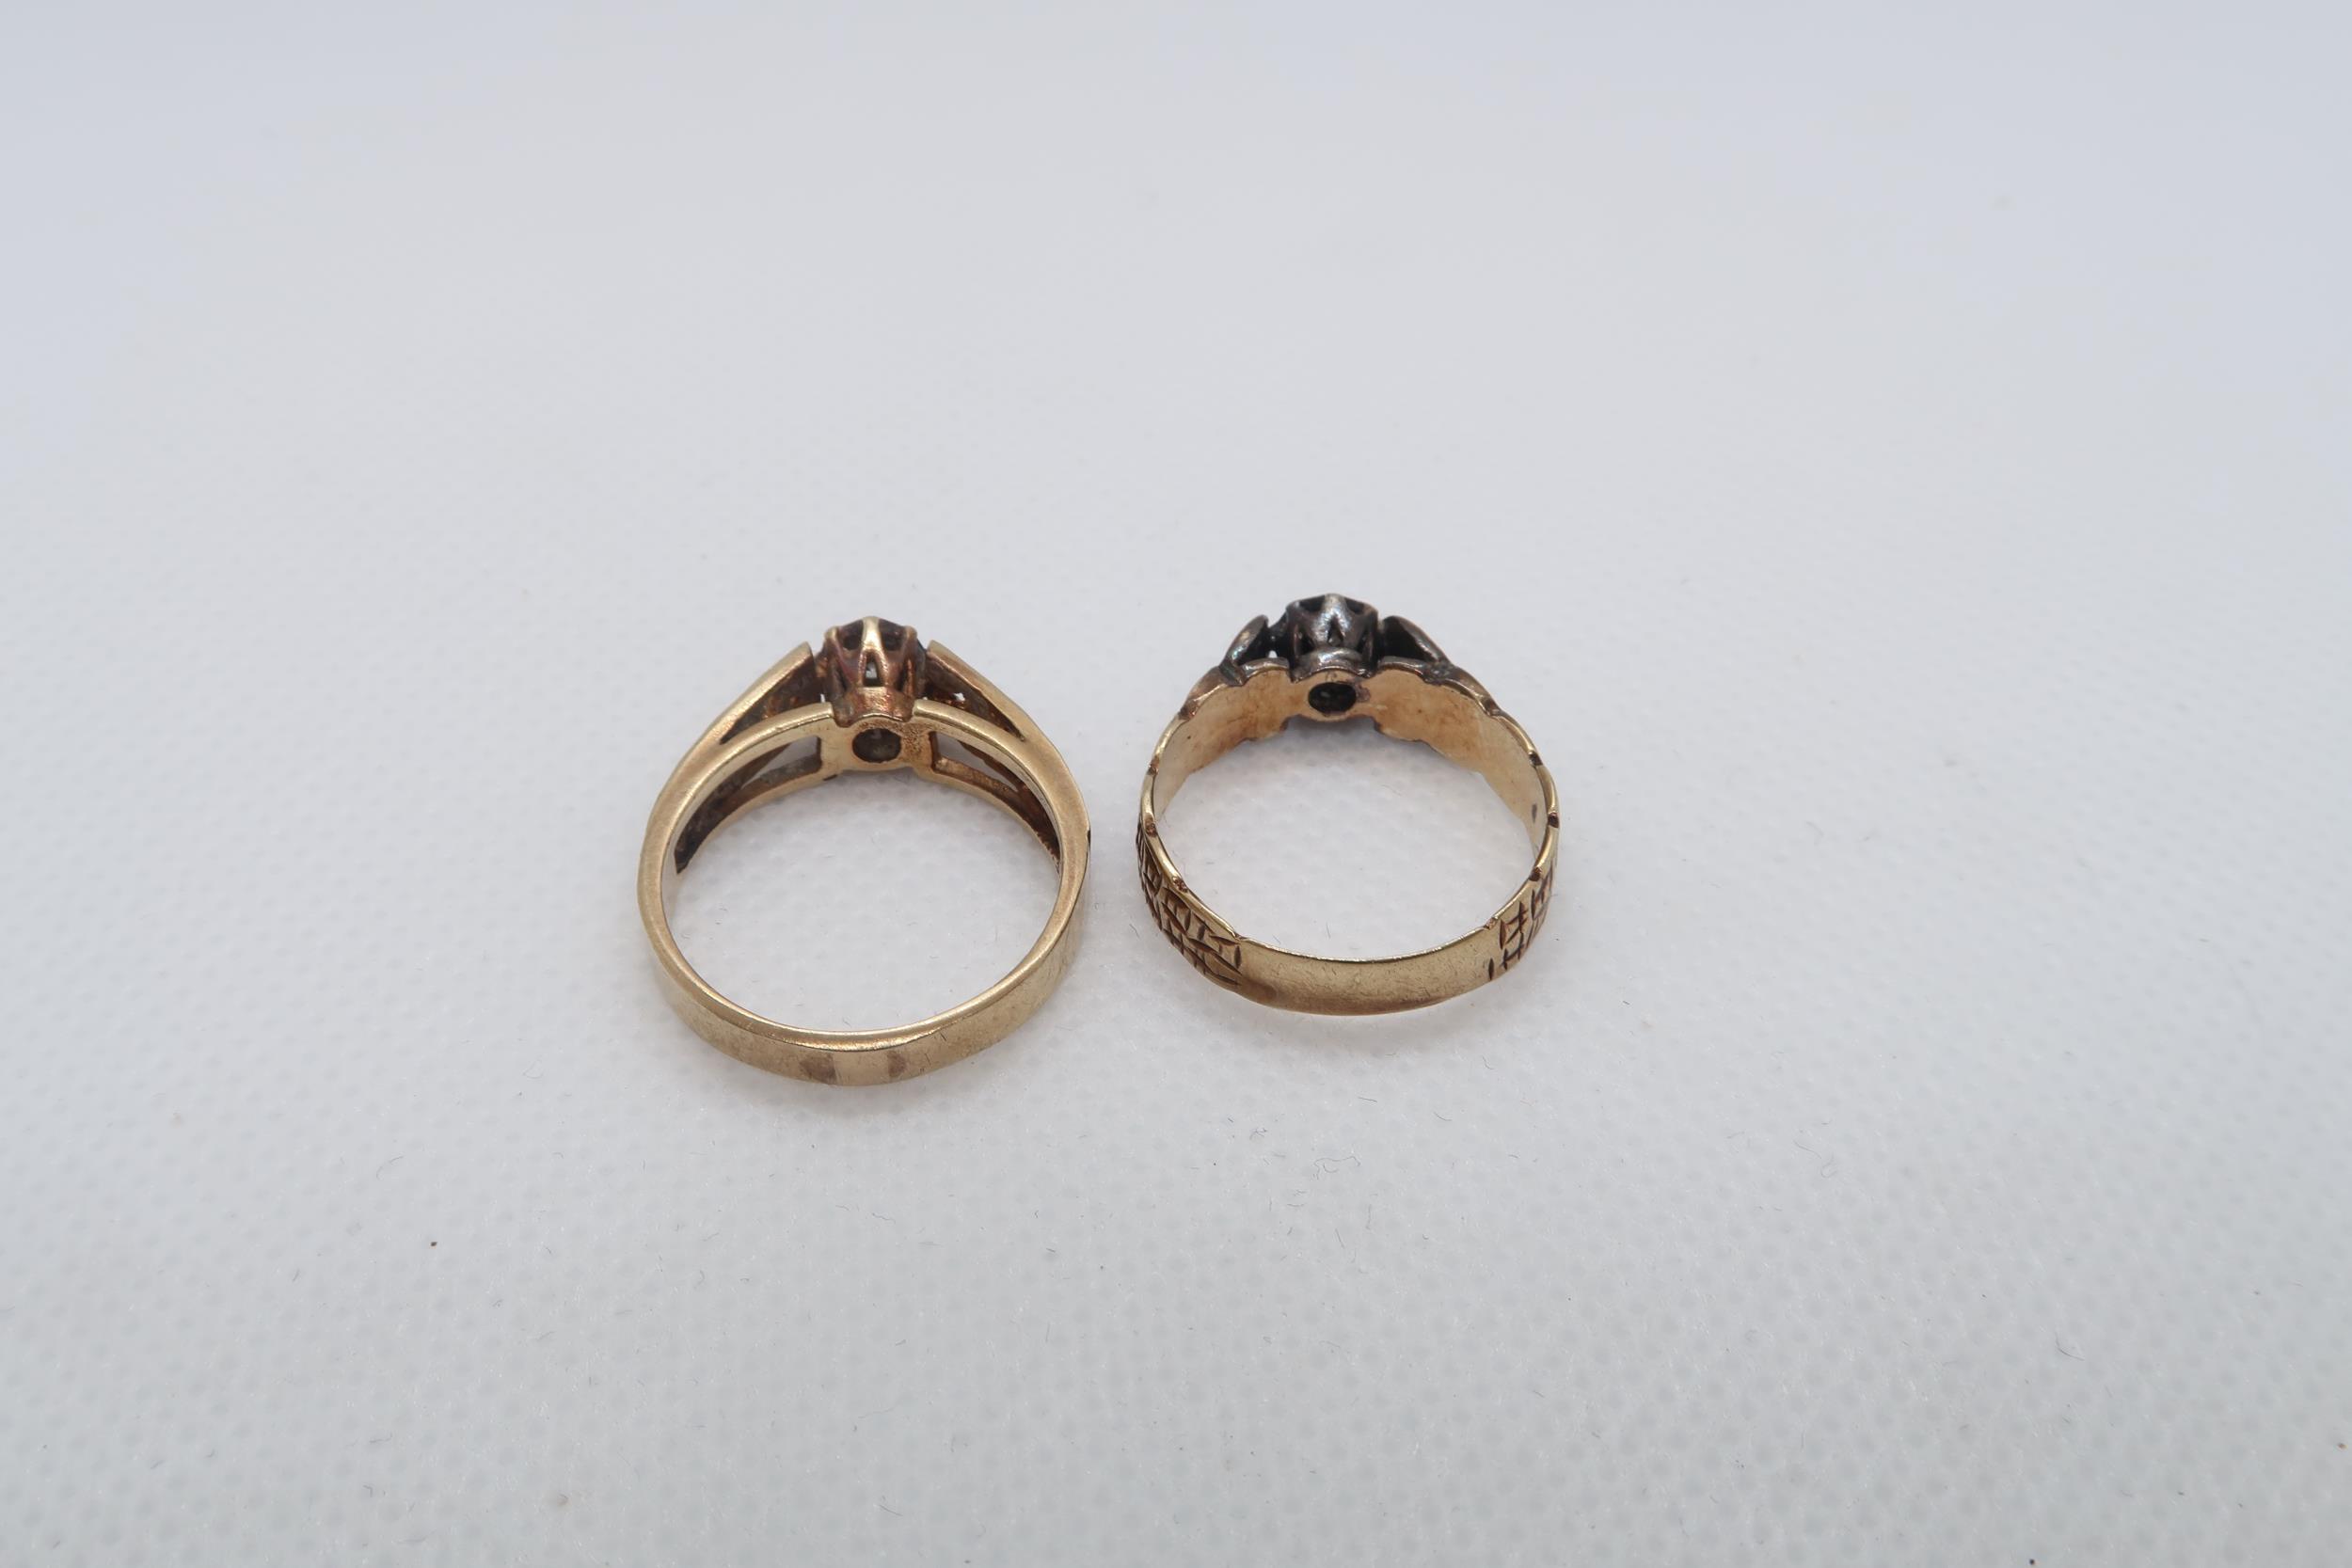 Two 9ct yellow gold (hallmarked) and diamond rings, sizes M/N & N - approx weight 5.1 grams - Image 2 of 2